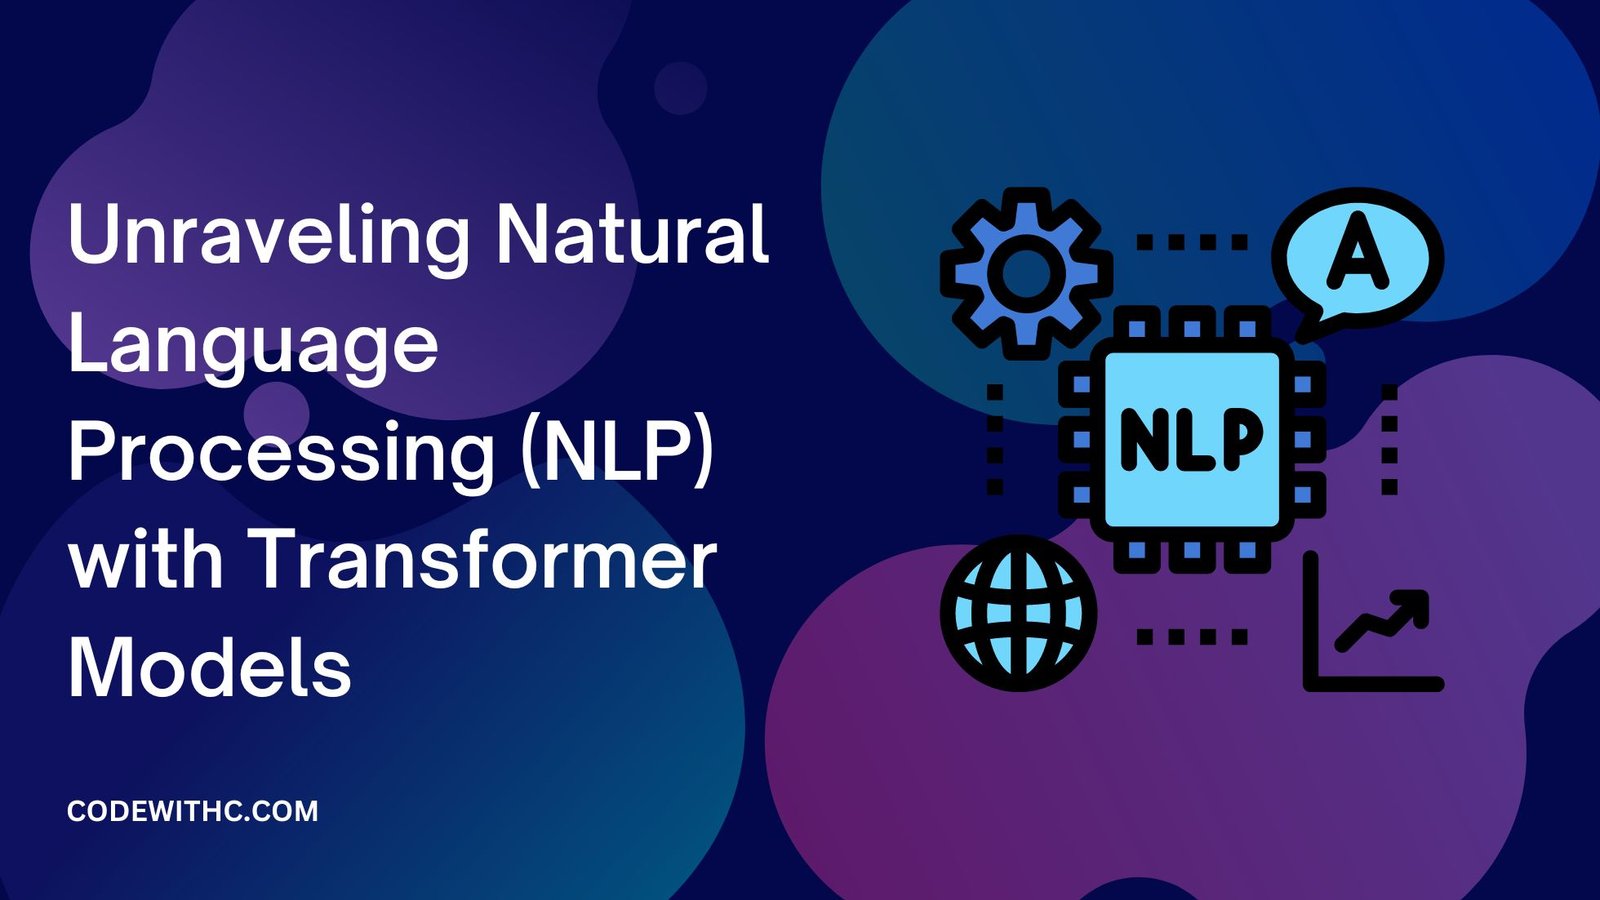 Unraveling Natural Language Processing (NLP) with Transformer Models